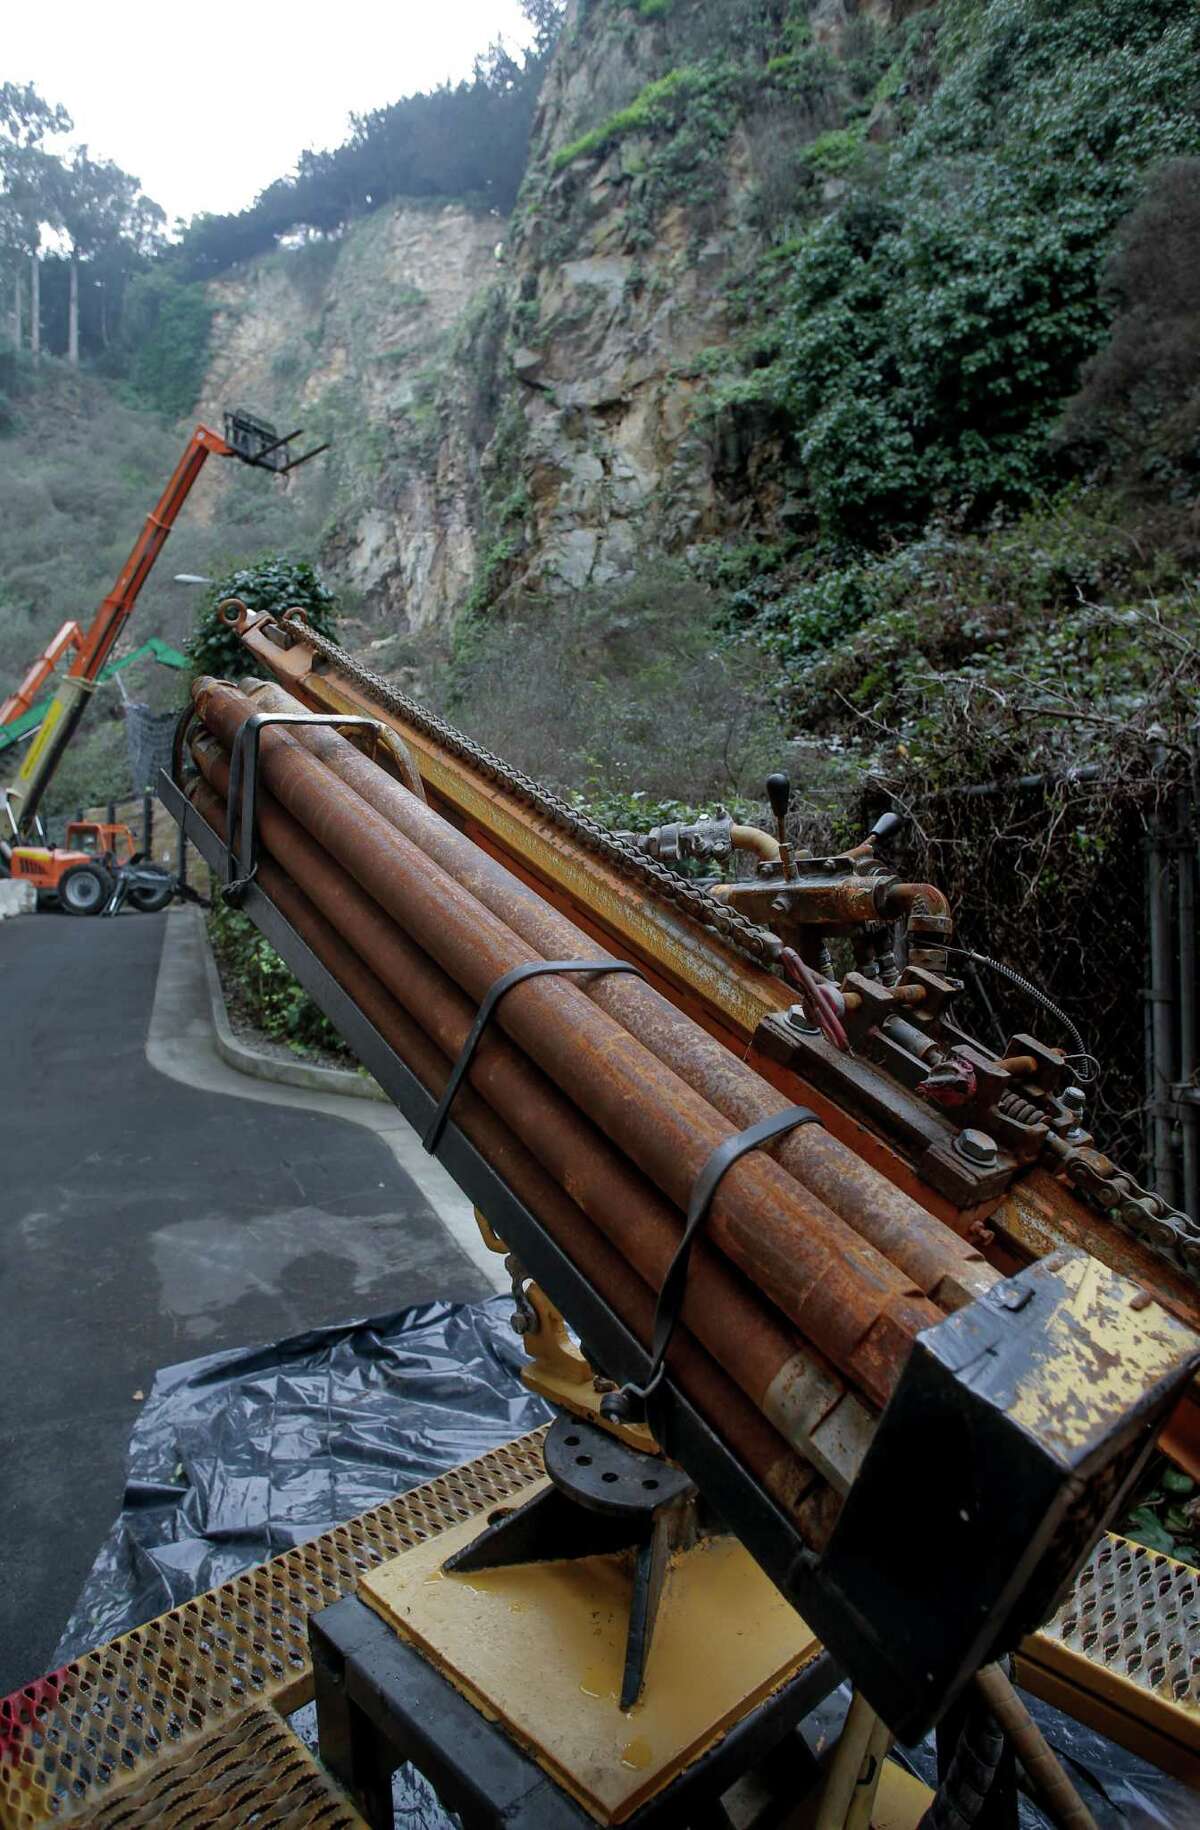 A pallet drill will be used to drill holes into solid rock for the 30 foot long anchors as the San Francisco Public Works department begins a six-month Telegraph Hill Rock Slope Improvement project to stabilize the crumbling cliff below Coit Tower in San Francisco, Calif. on Tuesday Dec. 9, 2014.